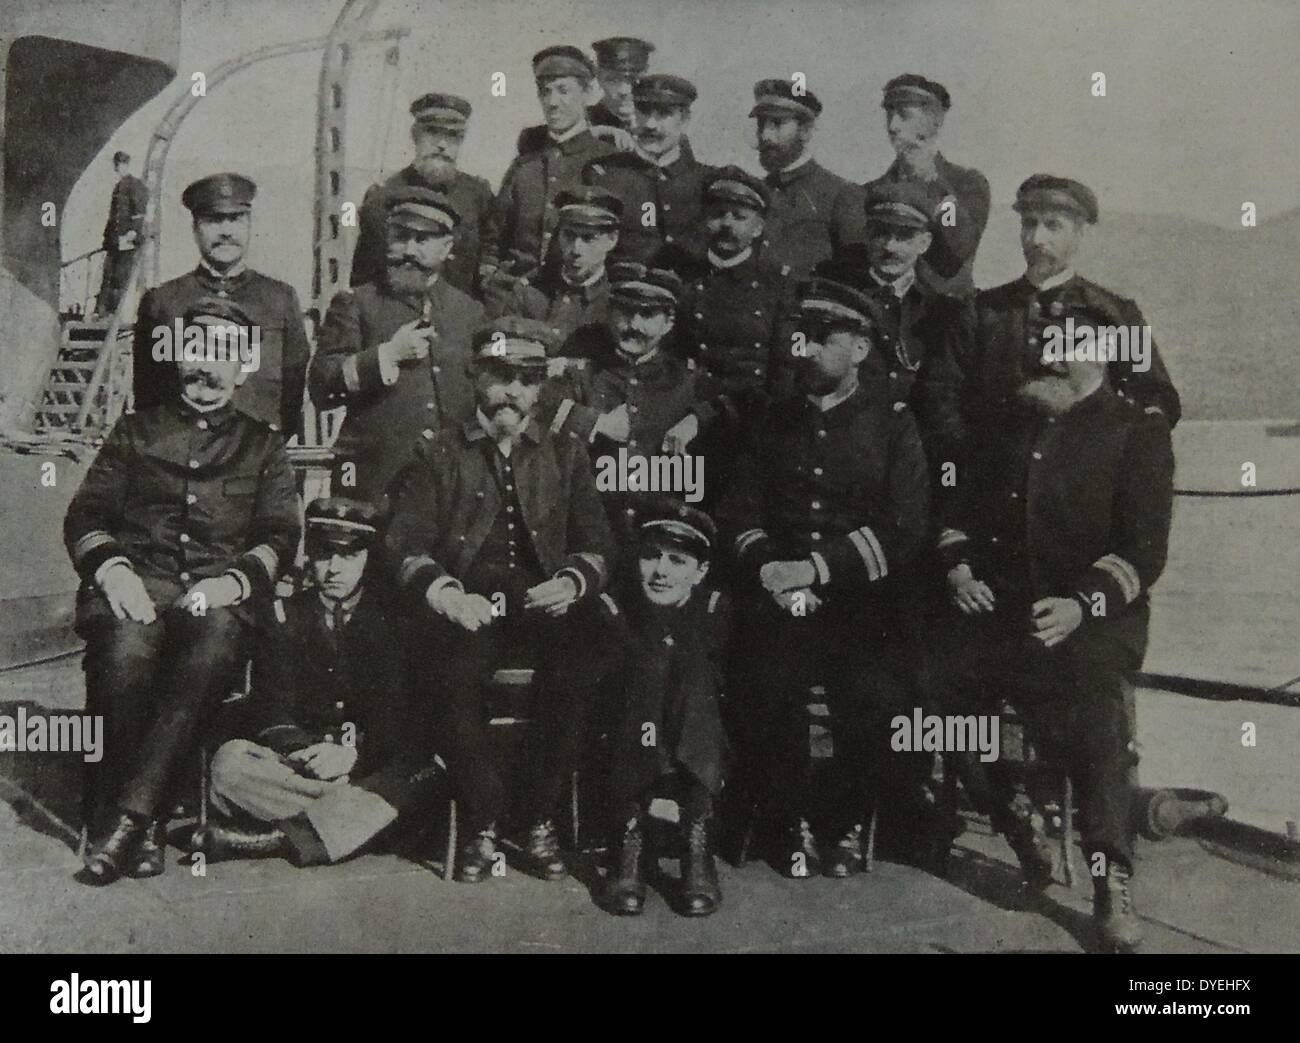 World War I - surviving officers and crew of the French battleship 'Bouvet' sinking near gallipoli 1915. In World War I, she escorted troop convoys from North Africa to France. She then joined the naval operations off the Dardanelles, where she participated in a major attack on the Turkish fortresses in the straits on 18 March 1915. During the attack, she struck a mine and sank within two minutes; only some 50 men were rescued from a complement of 710. Stock Photo